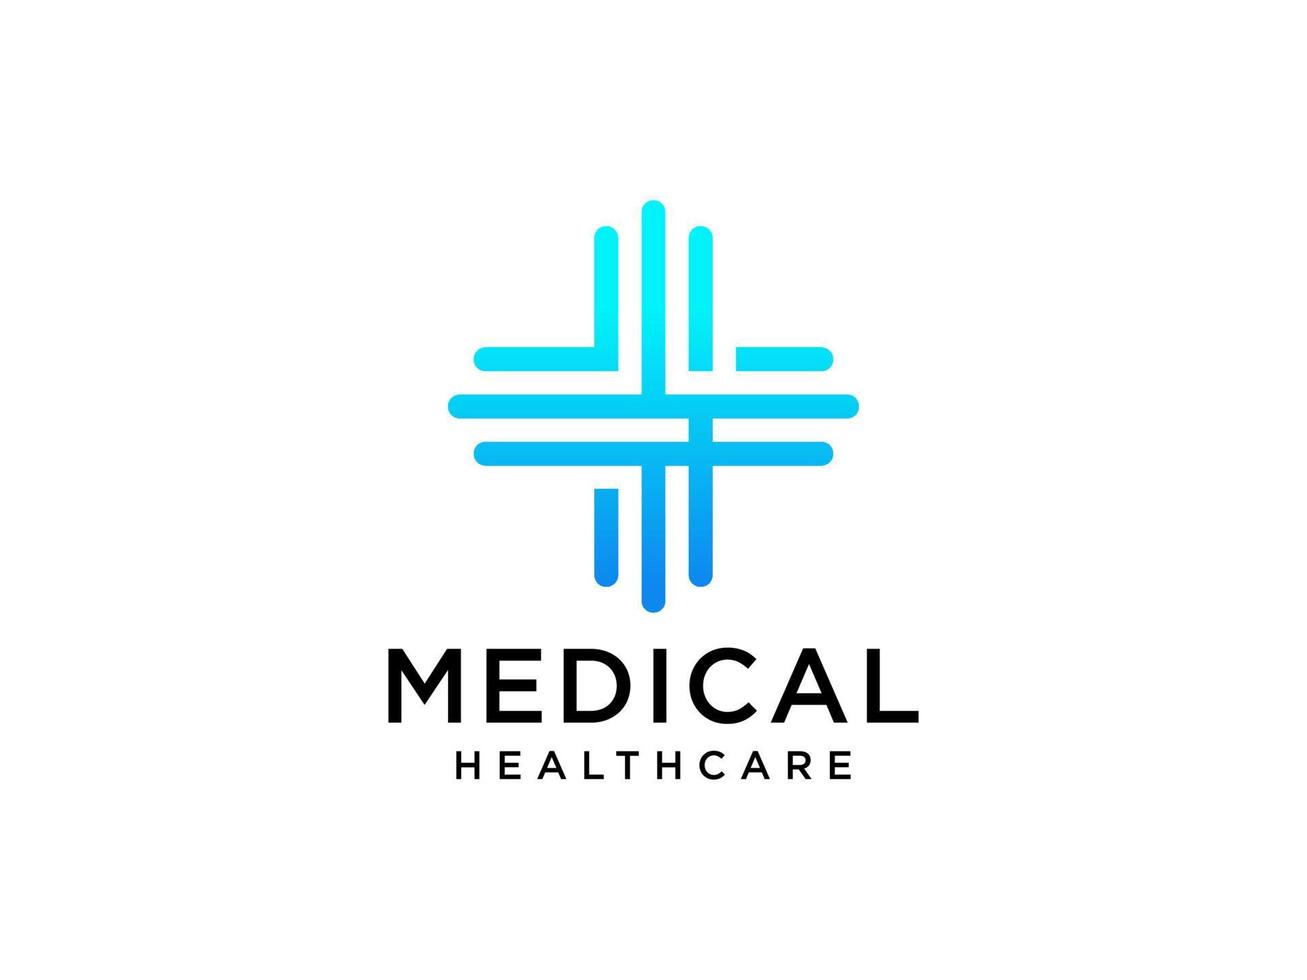 Medical Logo Healthcare Symbol Pharmacy Icon. Blue Motion Cross Sign Origami Style isolated on White Background. Flat Vector Logo Design Template Element.